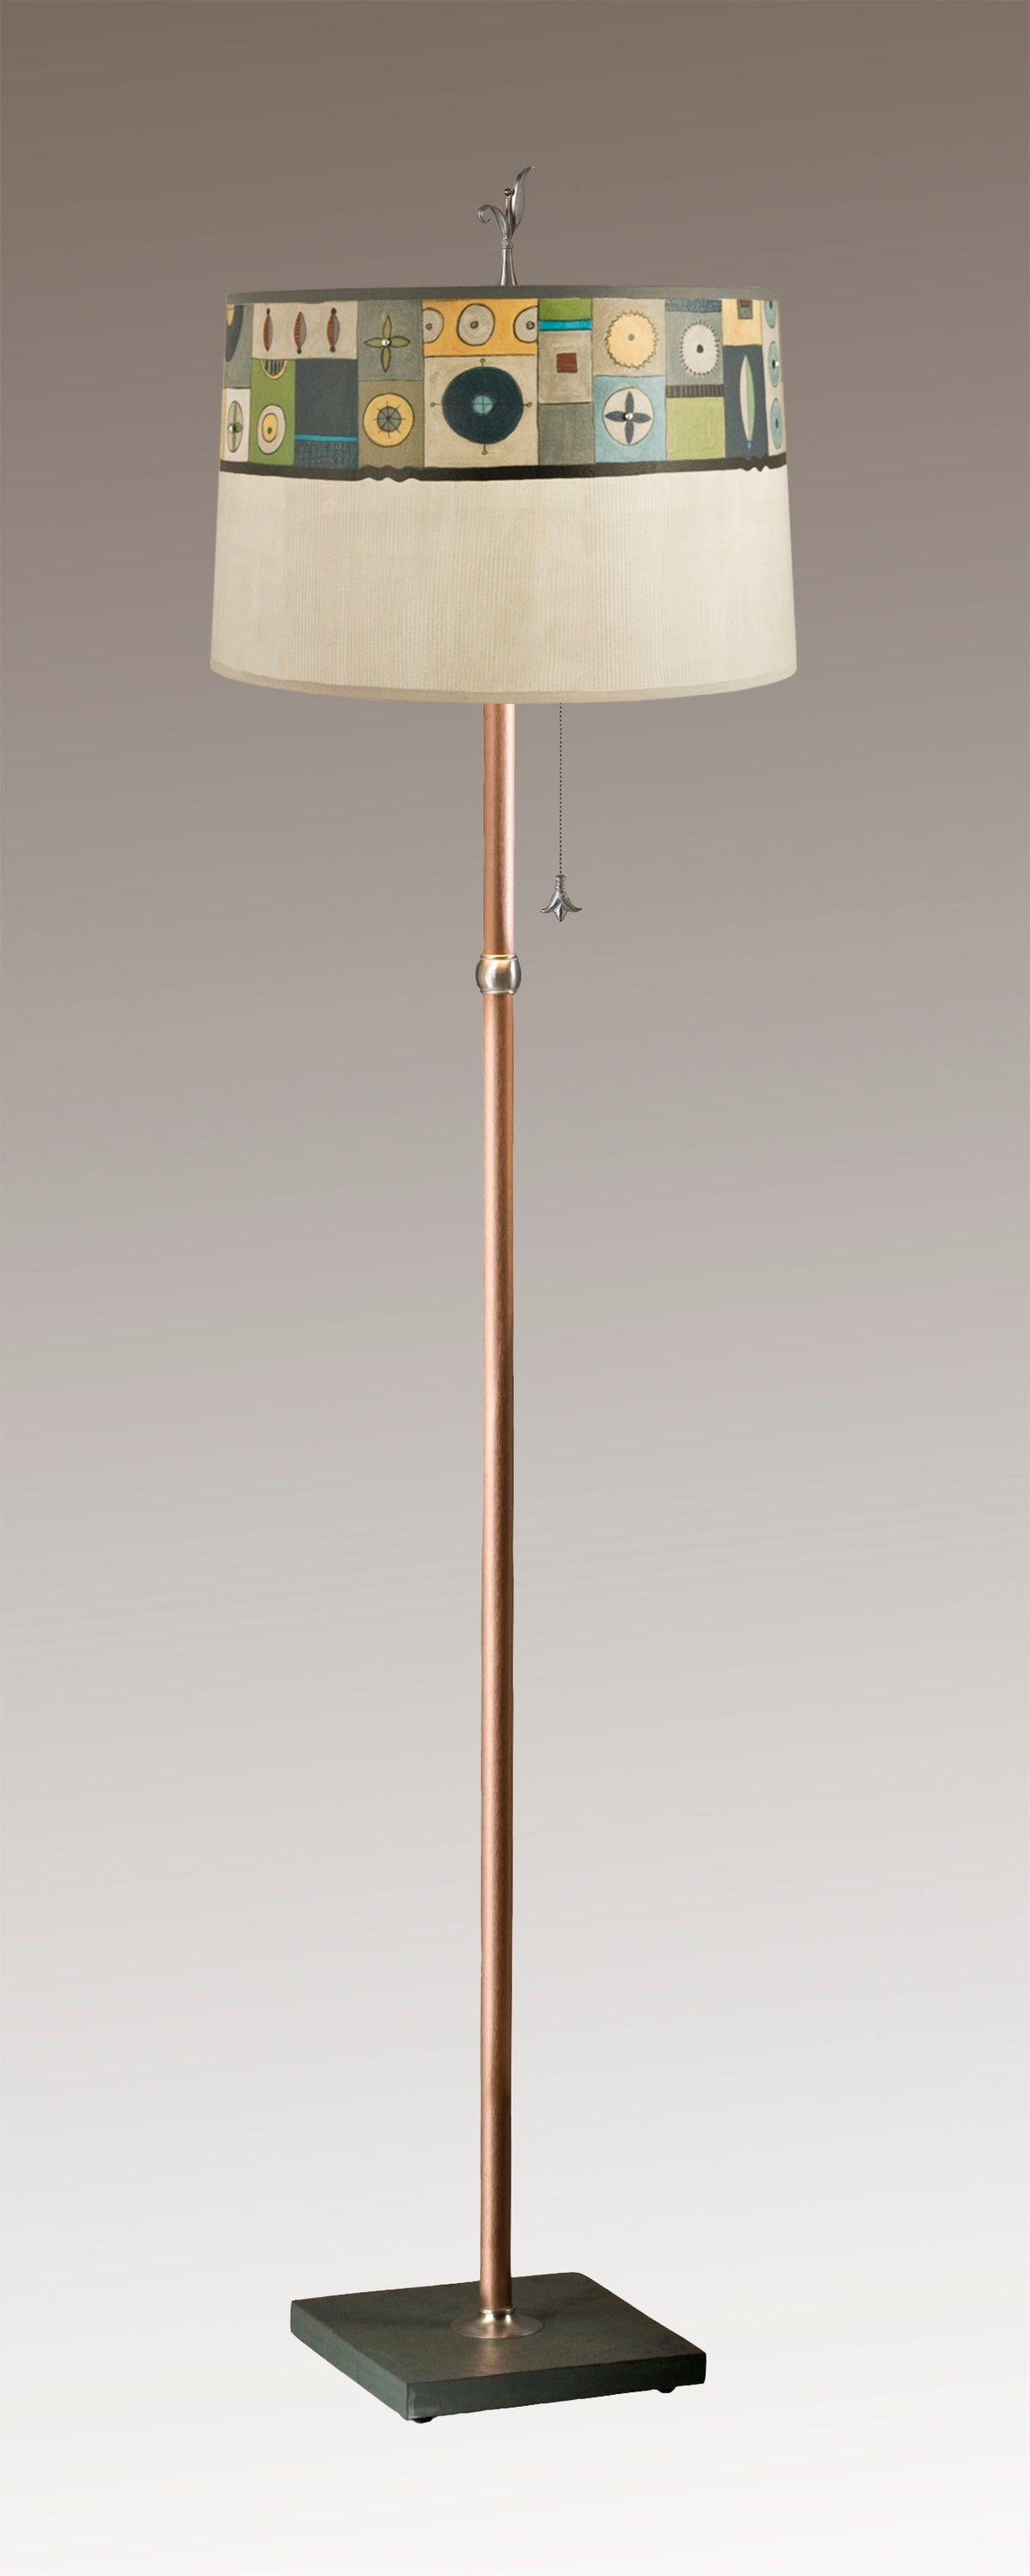 Copper Floor Lamp with Large Drum Shade in Lucky Mosaic Oyster